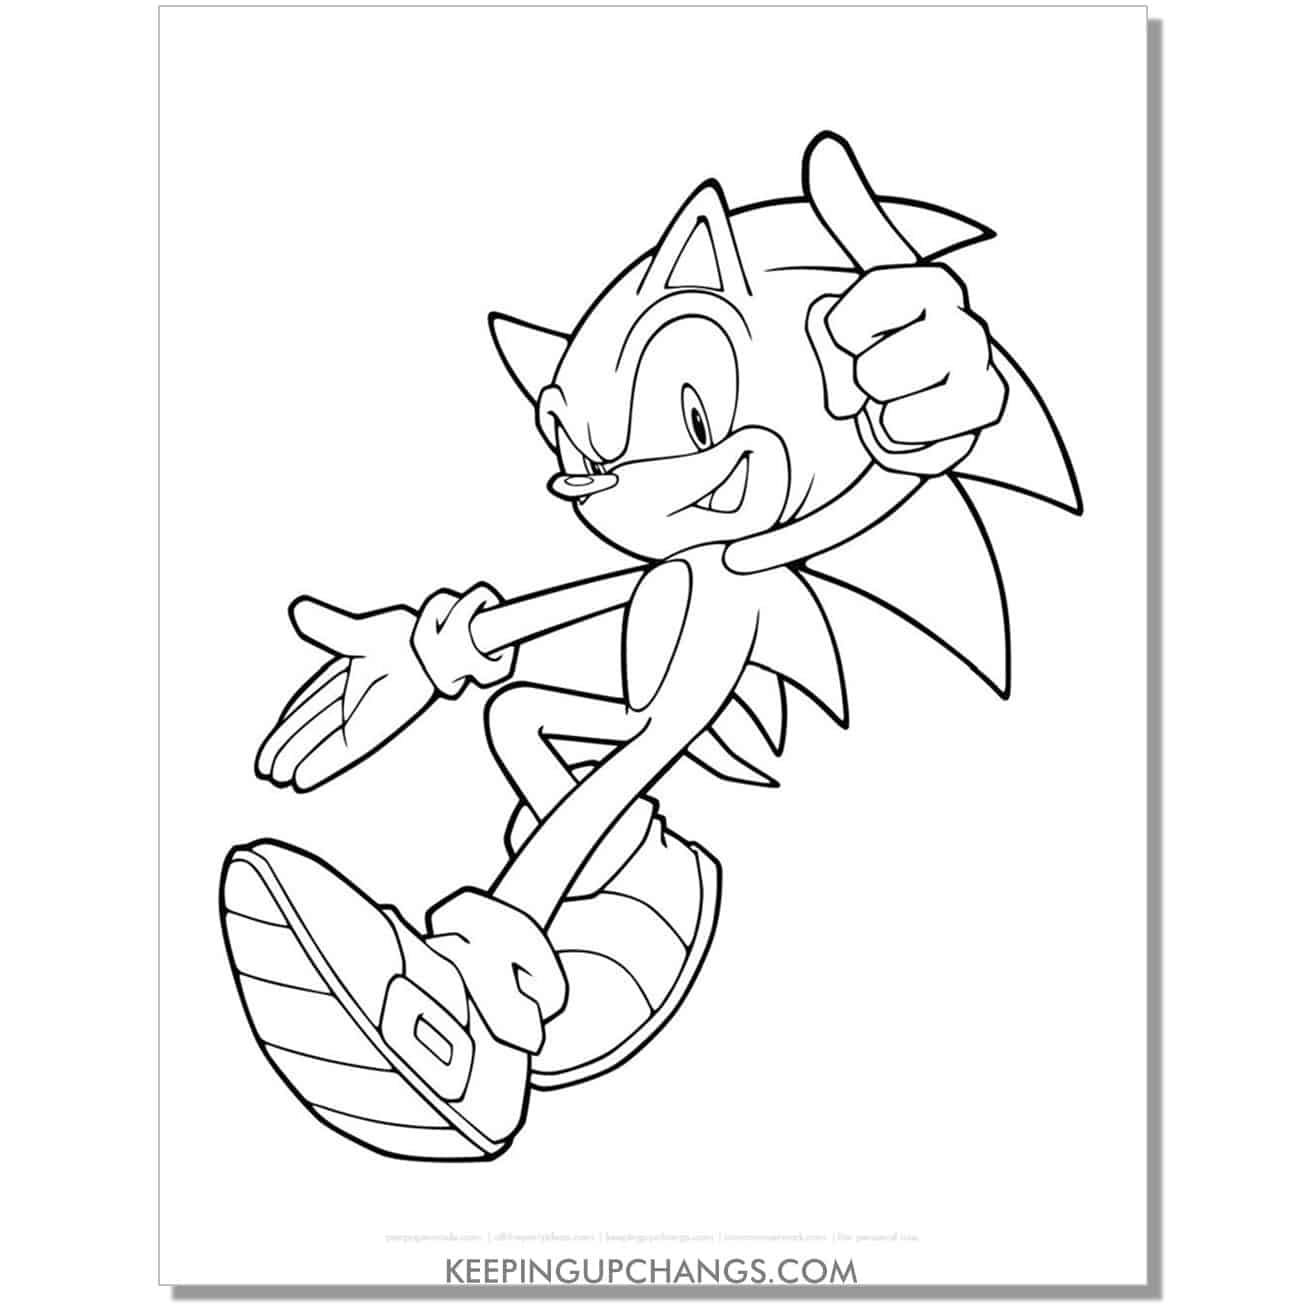 sonic leaning back with one hand out and other pointing coloring page.